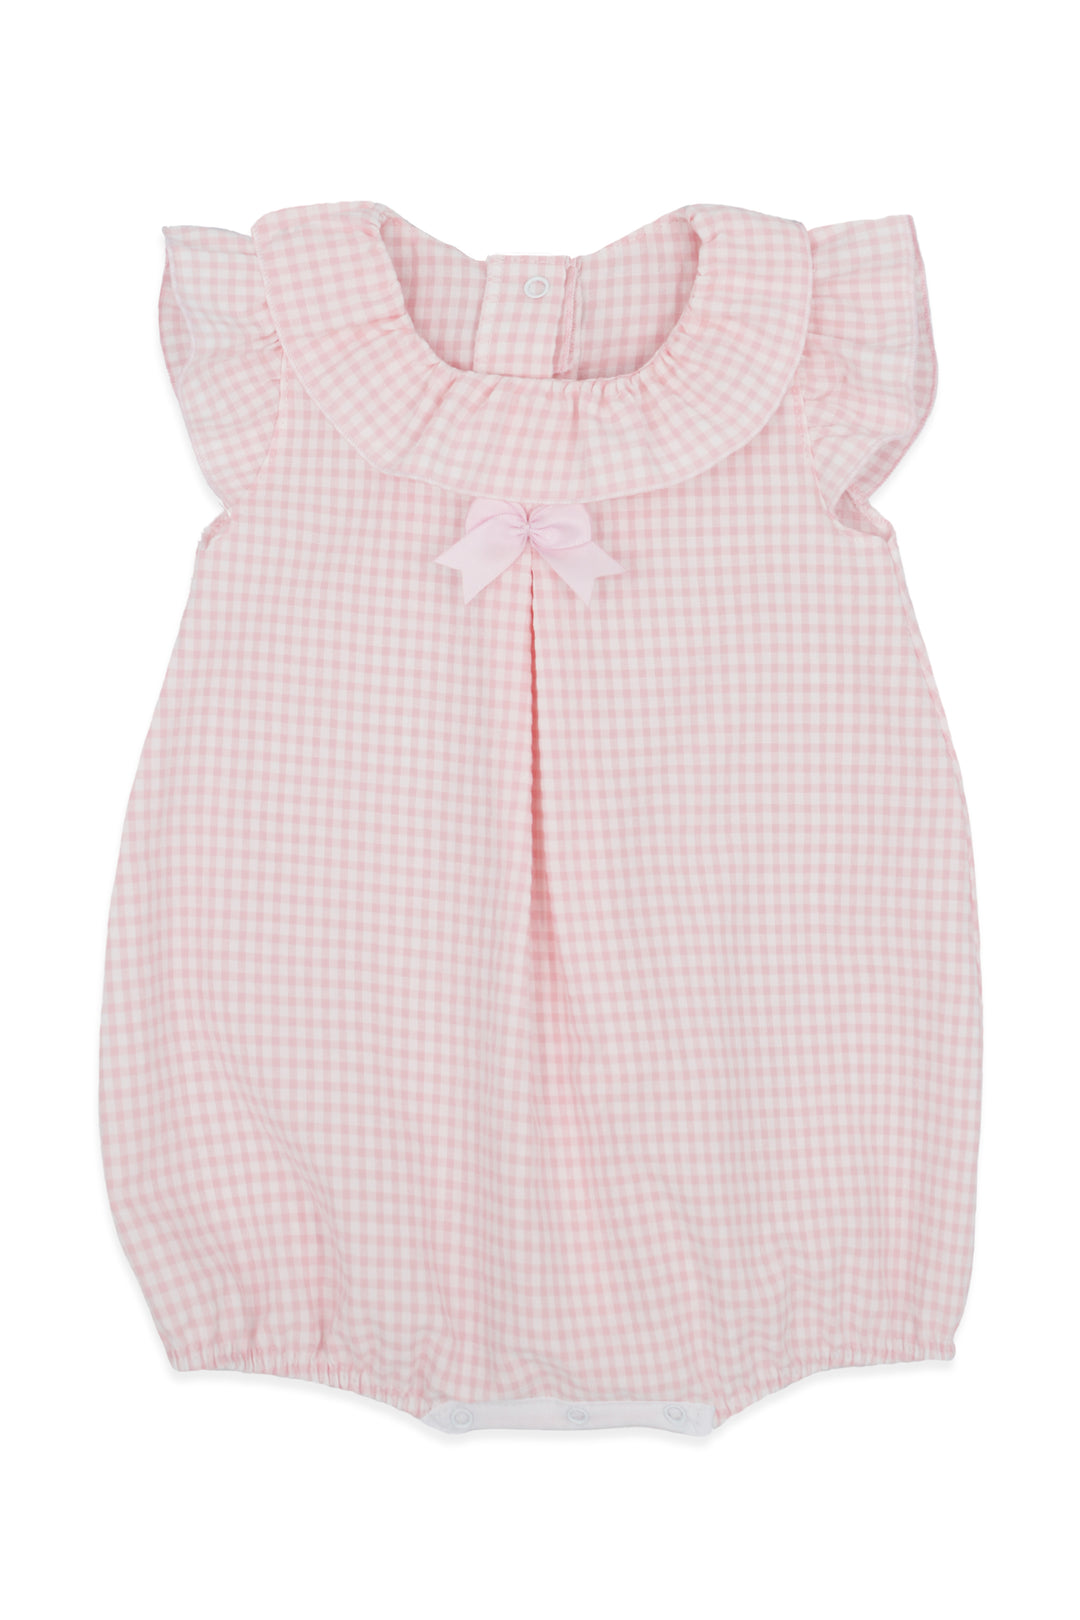 Rapife PREORDER "Evelina" Pink Gingham Romper | Millie and John